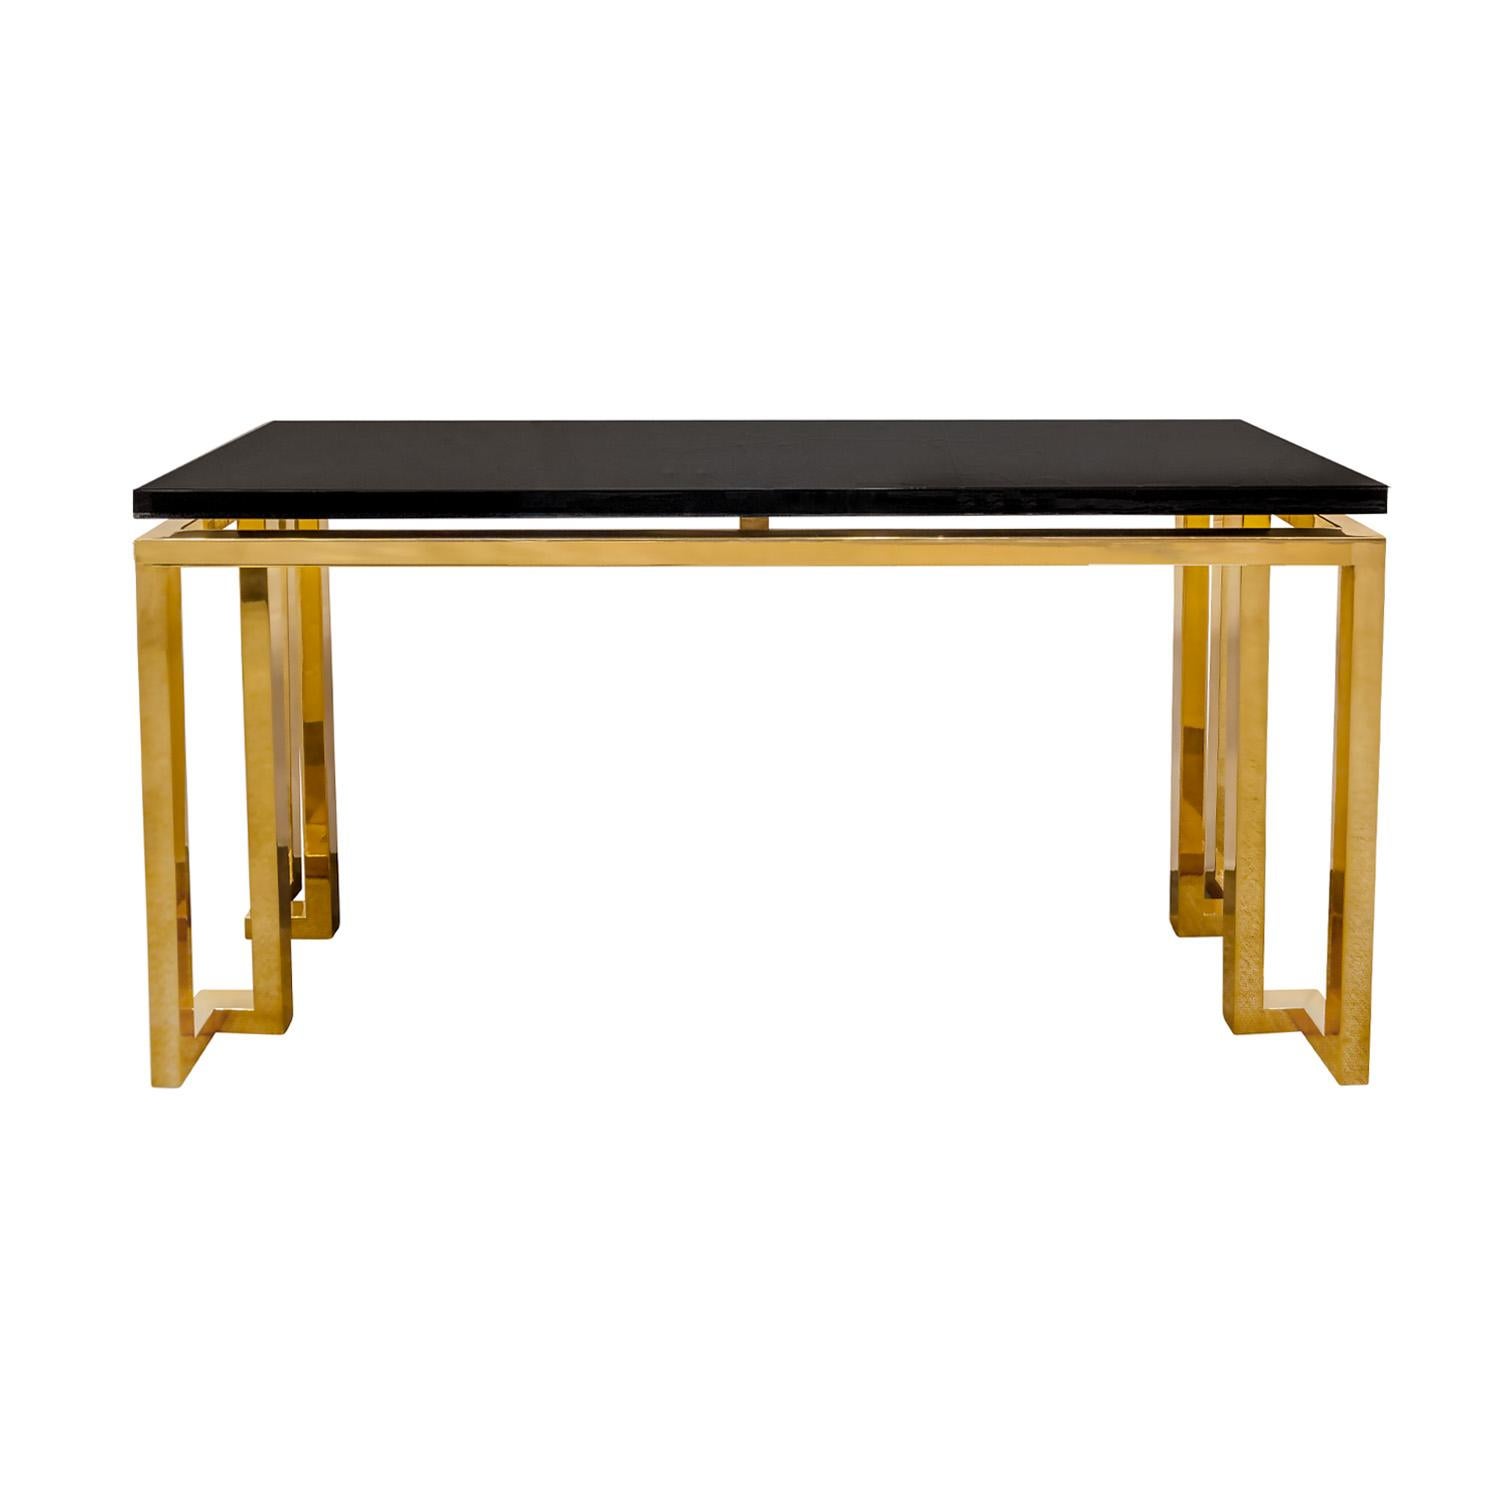 Console table with sculptural base in polished brass with high gloss black lacquer top by Luten-Clarey-Stern (LCS), American 1980's.  The top has been newly relacquered by Lobel Modern.  The combination of brass and black lacquer is super chic.